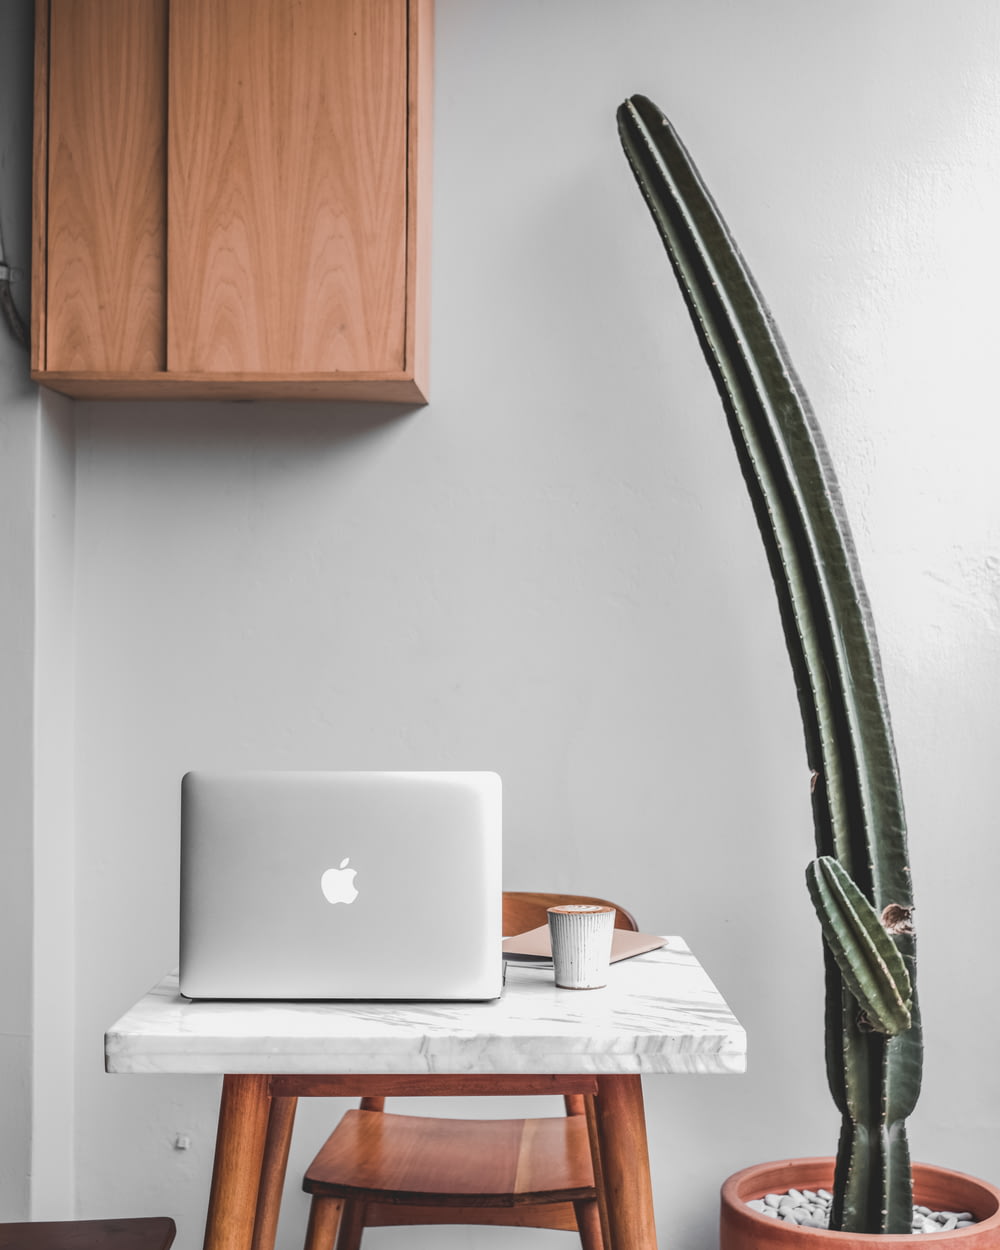 silver iMac on table beside green cactus plant